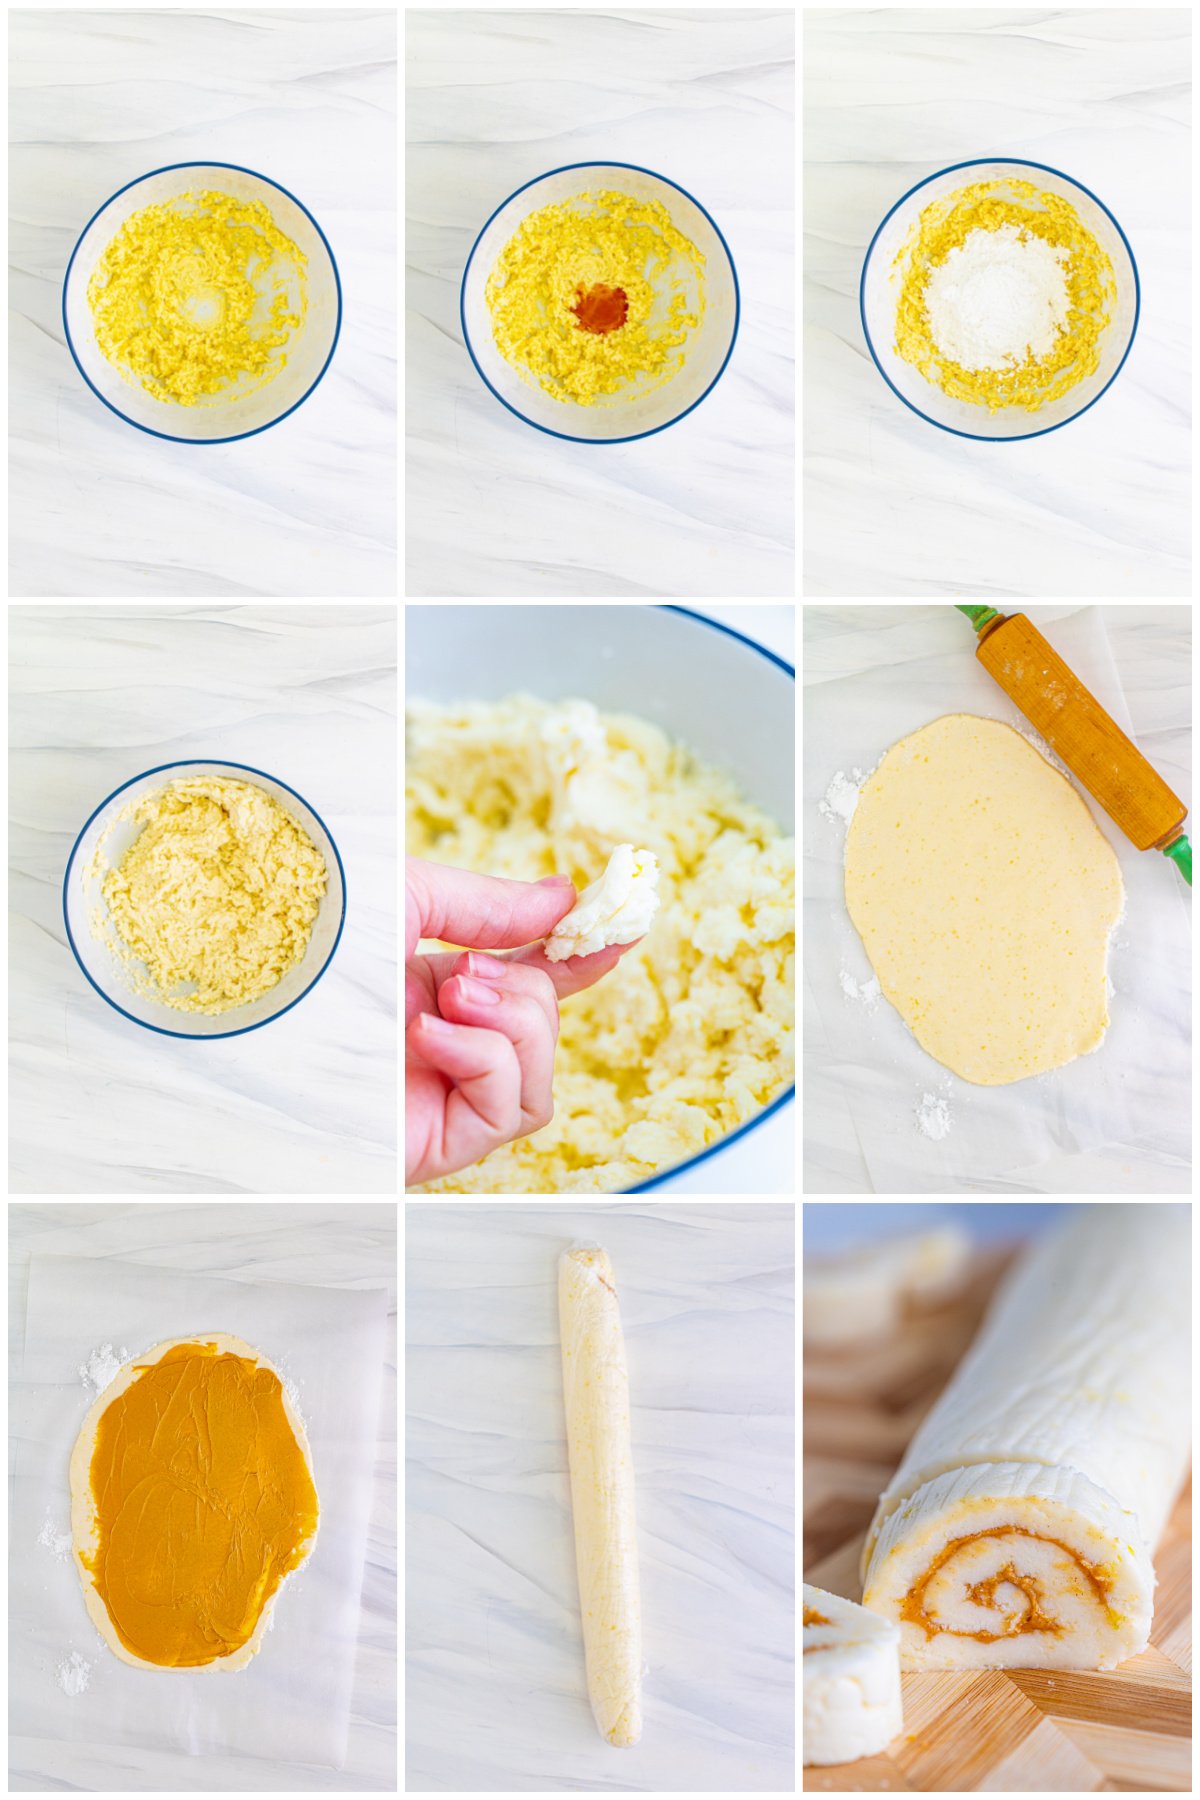 Step by step photos on how to make Potato Candy.